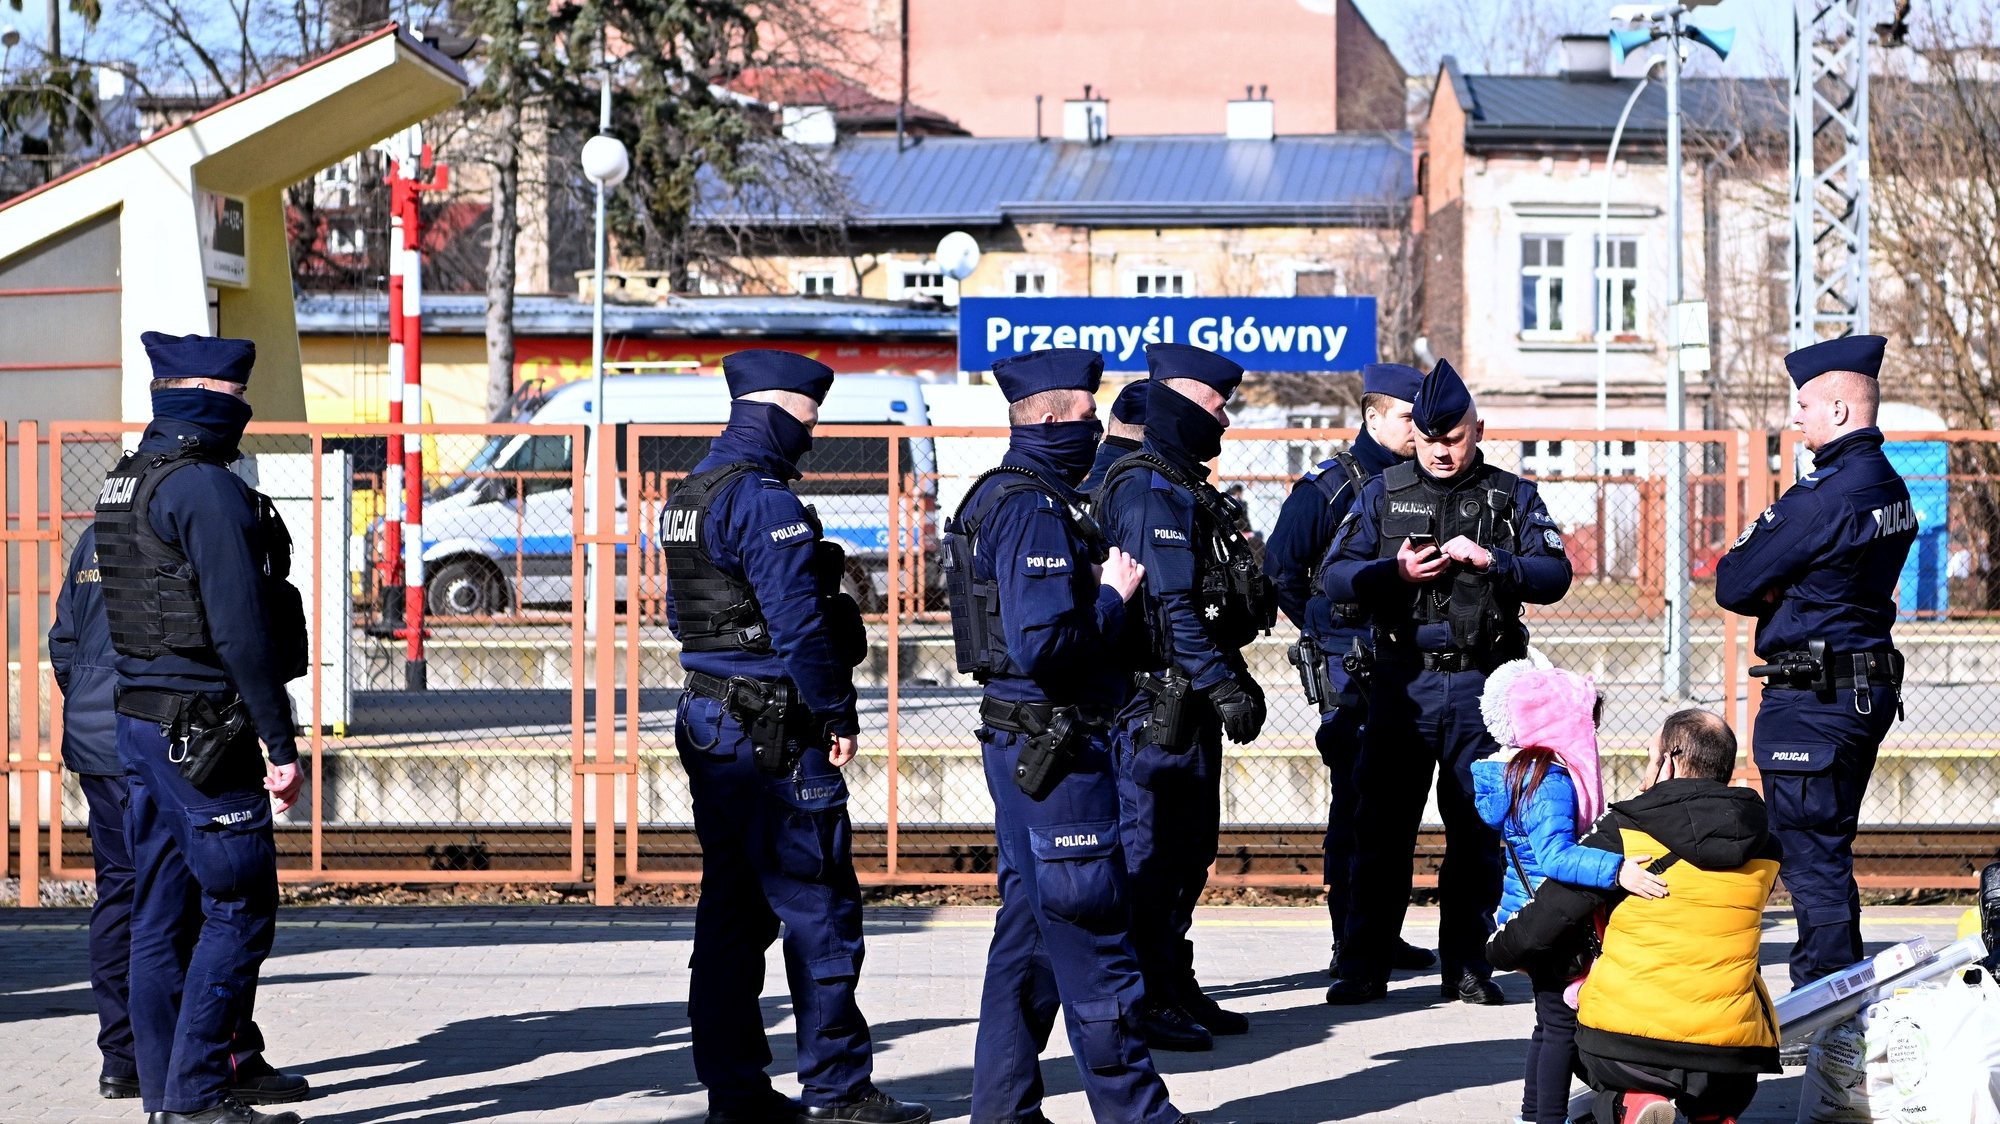 epa09819387 Refugees from Ukraine arrive at the train station in Przemysl, southeastern Poland, 12 March 2022. Since 24 February, 1.59 million people have crossed the Polish-Ukrainian border into Poland, Border Guard has reported on 12 March morning.  EPA/Darek Delmanowicz POLAND OUT